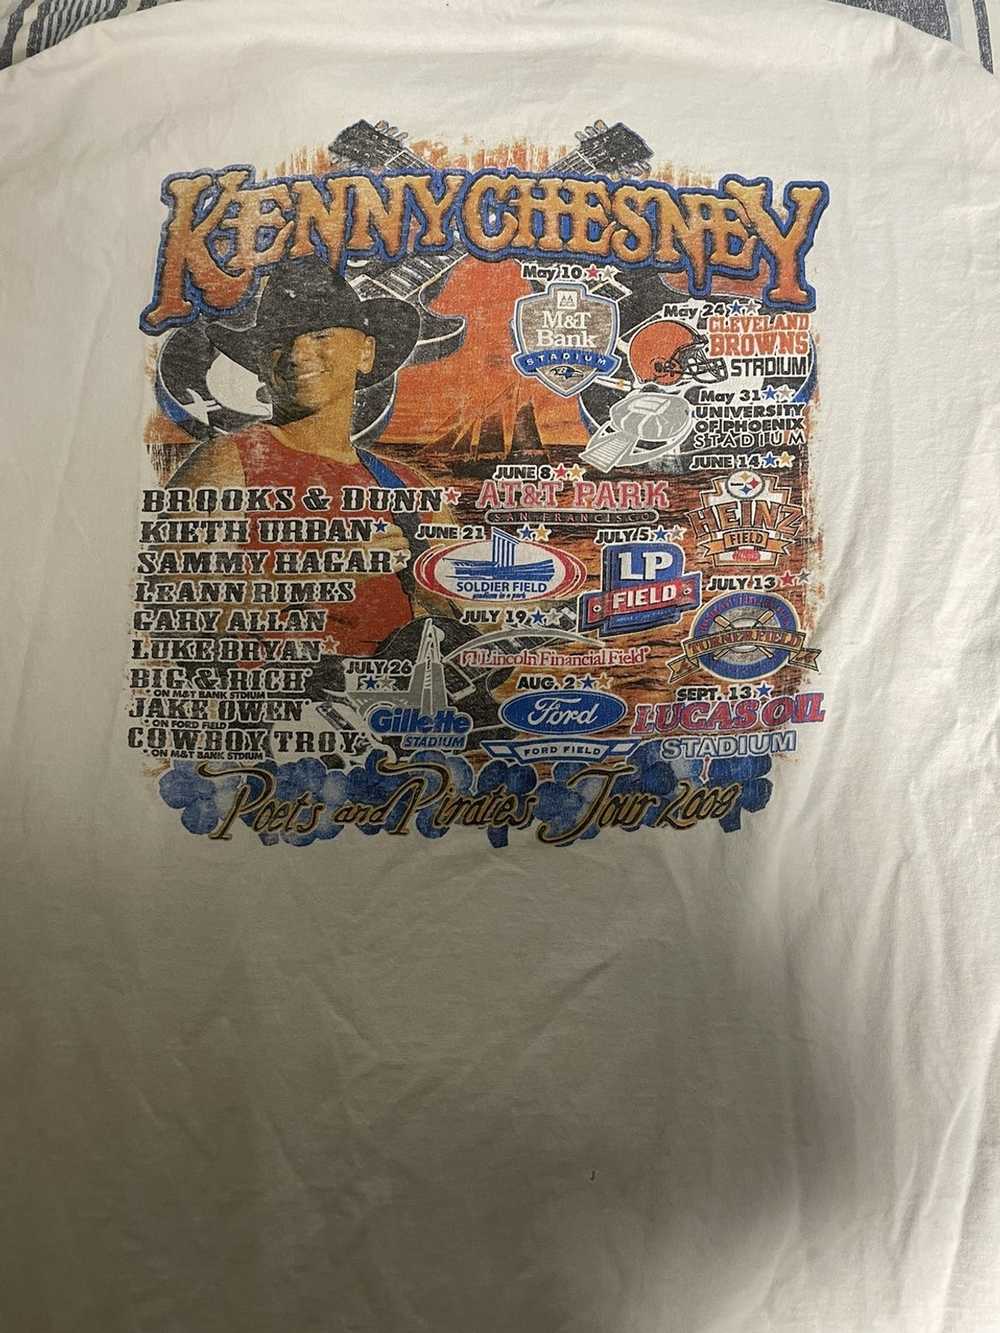 Band Tees × Vintage Kenny Chesney Vintage T-Shirt - image 2